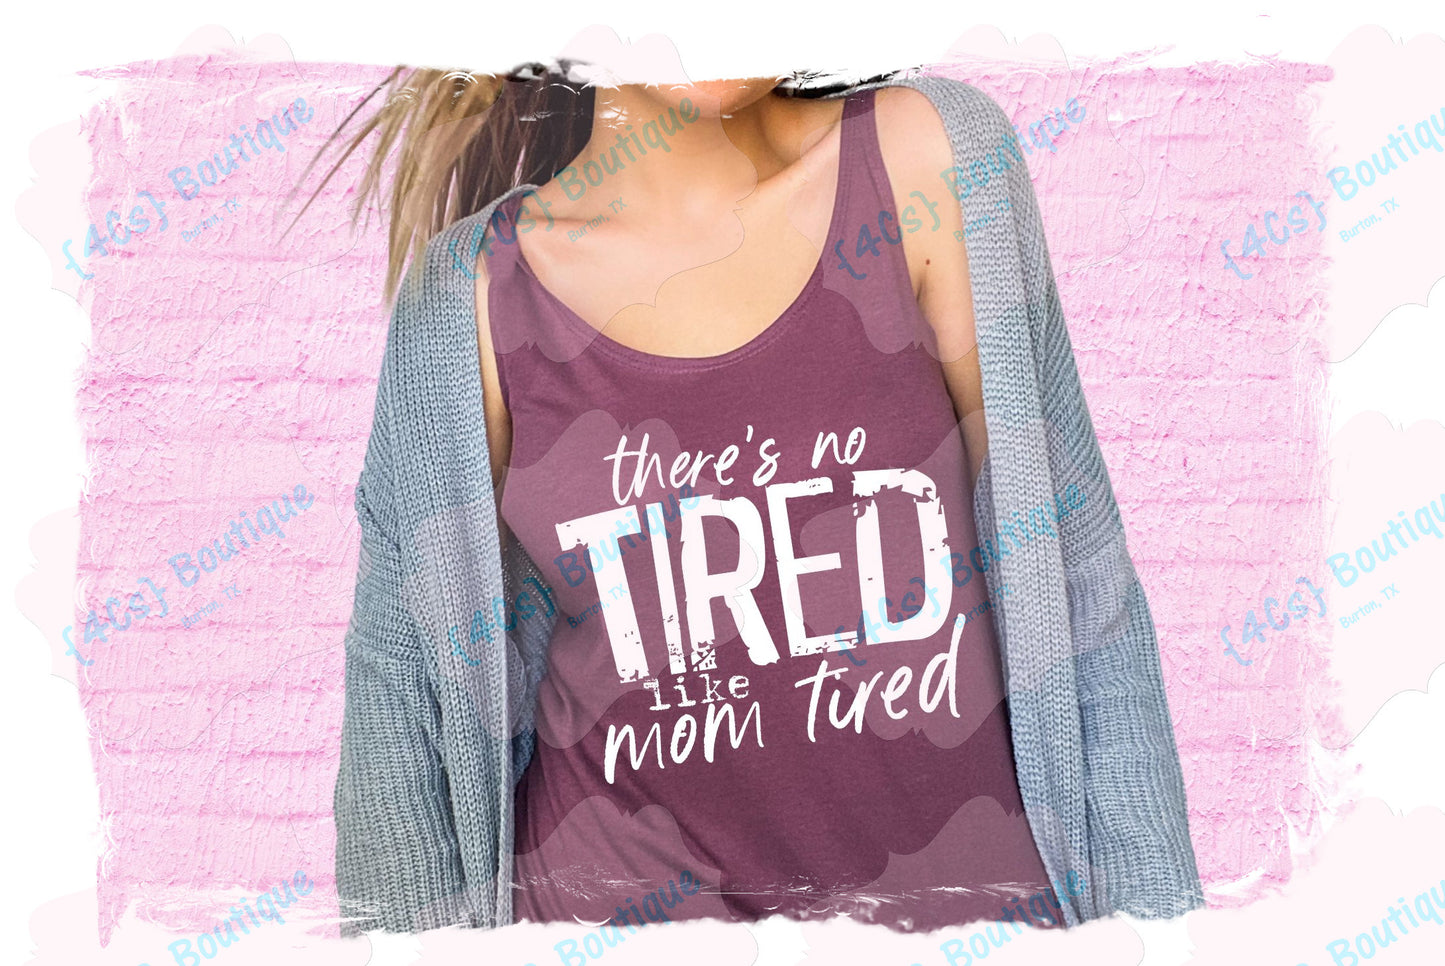 There's No Tired Like Mom Tired Shirt